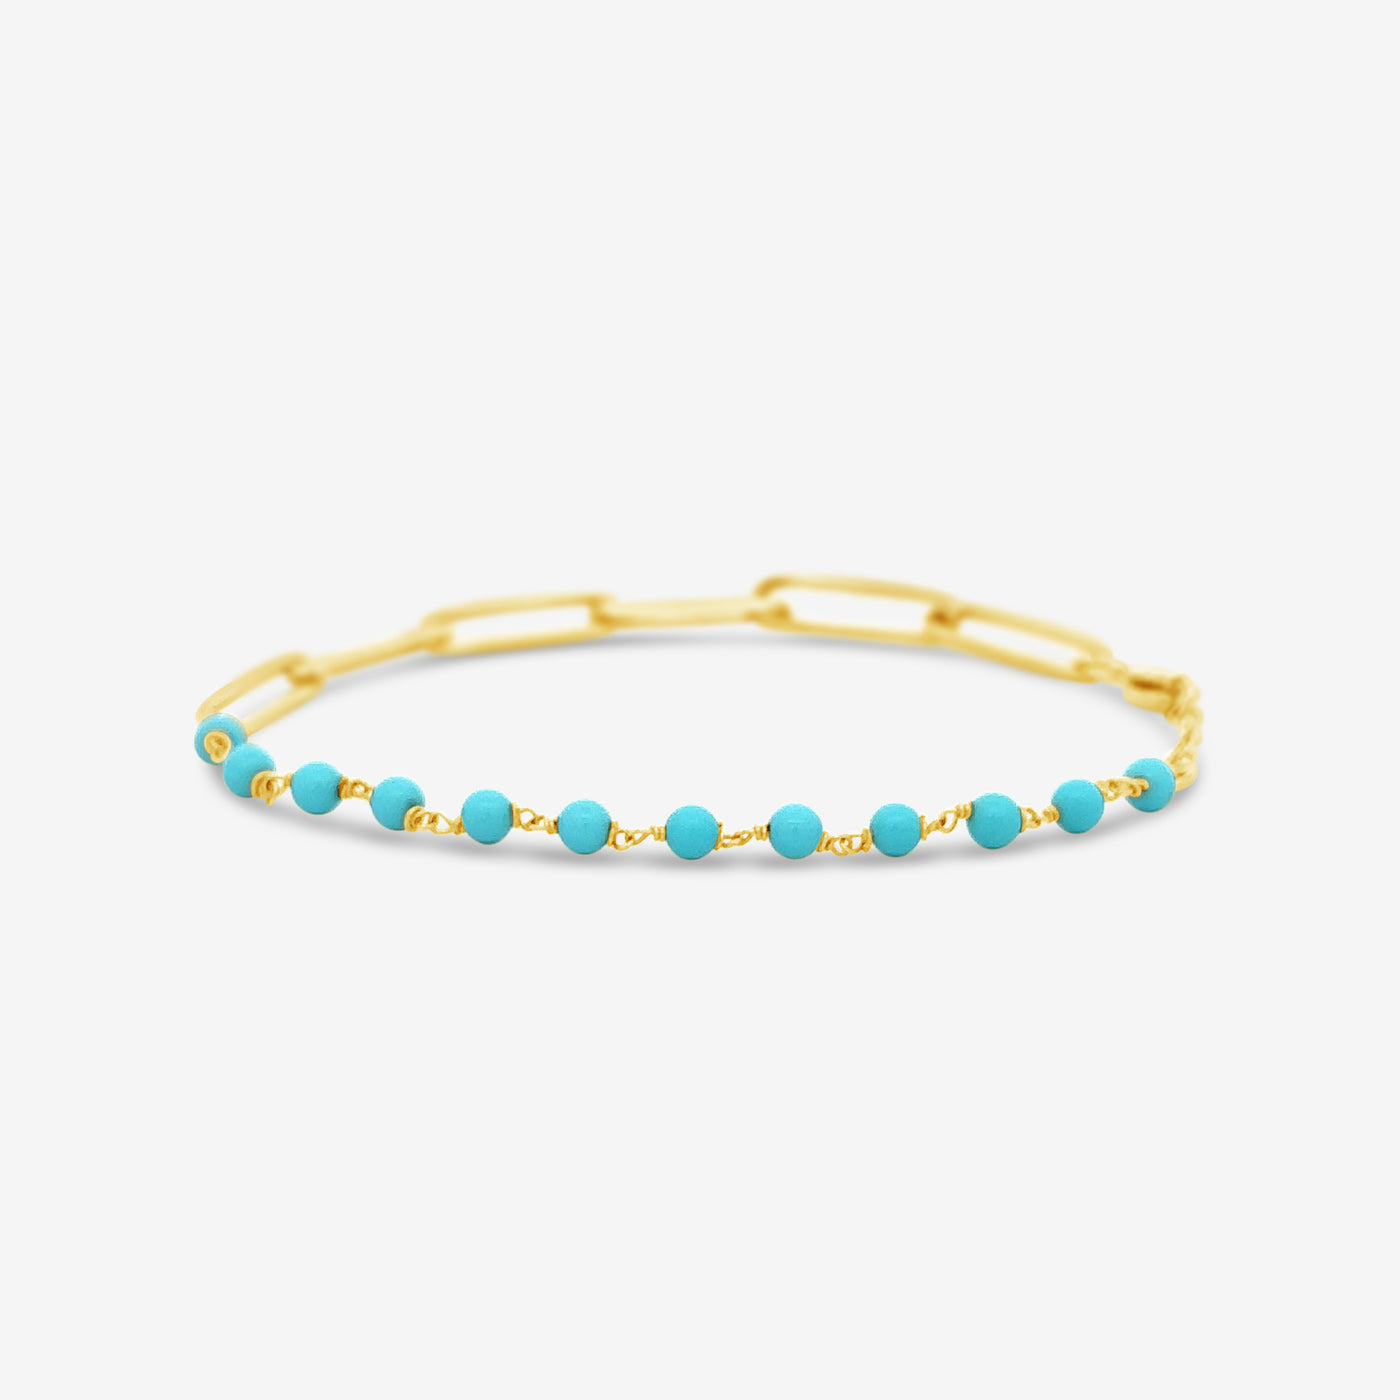 Half & Half Turquoise Bead and Paperclip Chain Bracelet